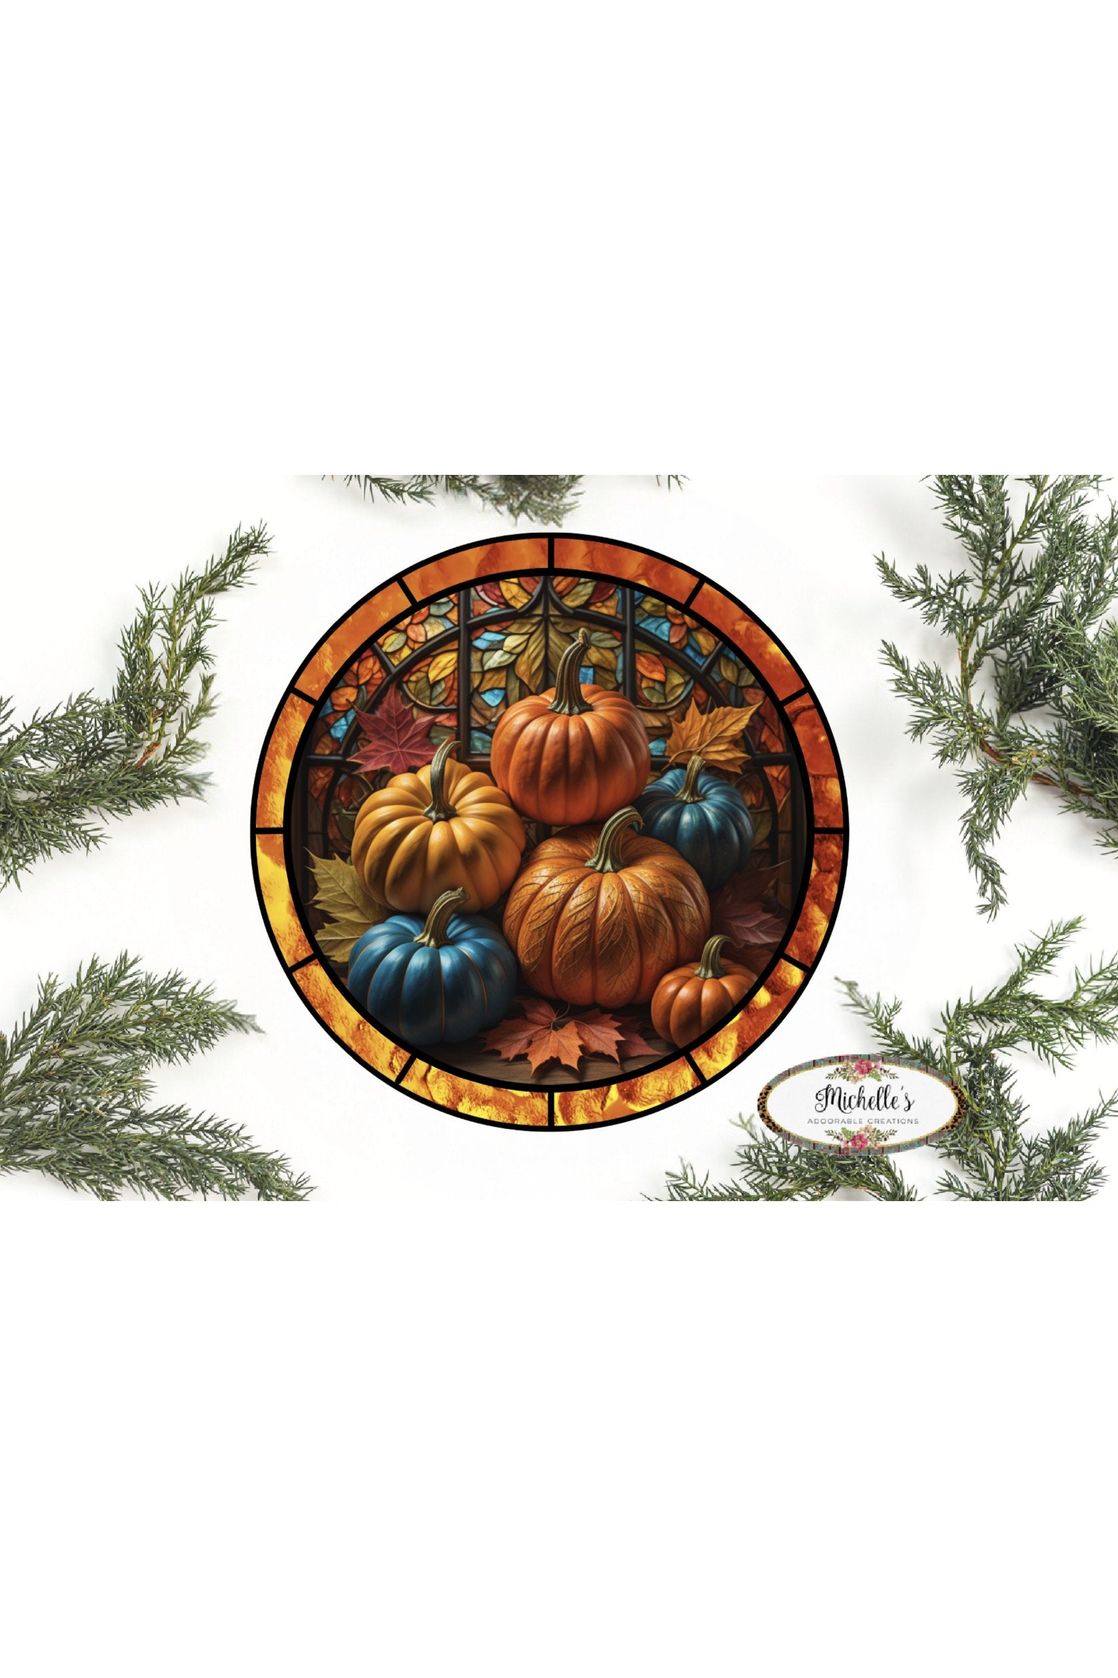 Shop For Faux Stained Glass Fall Foliage Pumpkin Sign - Wreath Accent Sign